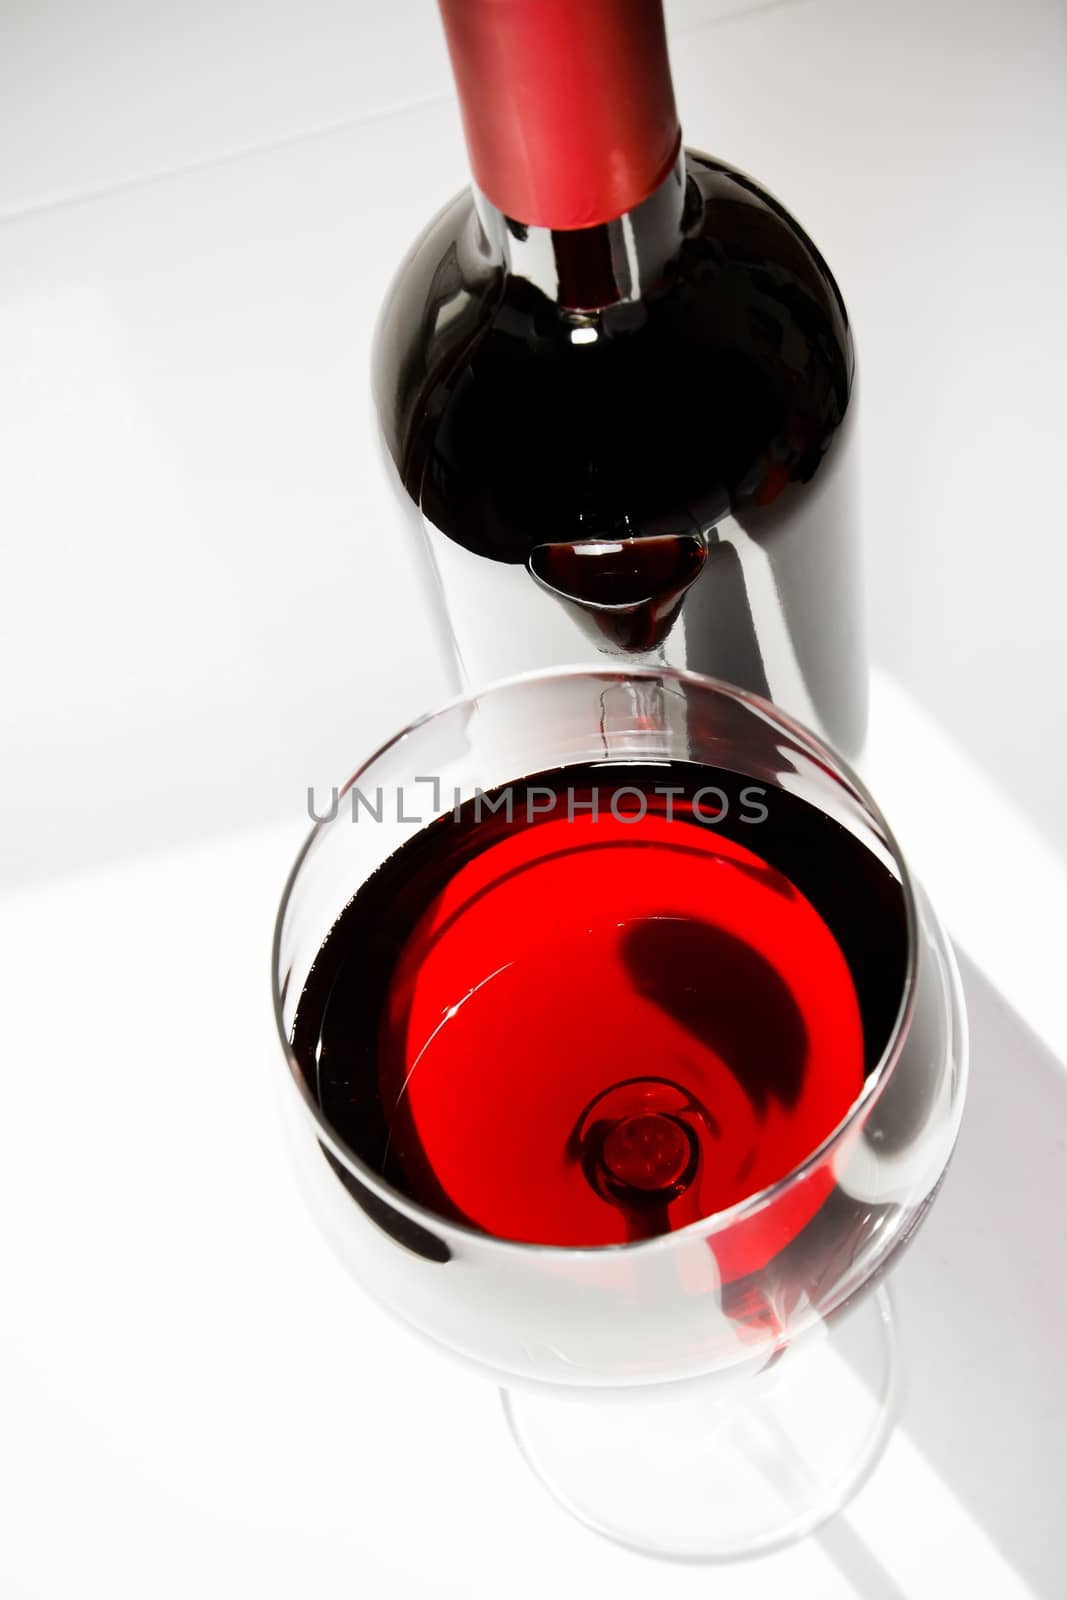 red wine glass near a bottle under daily light on white table